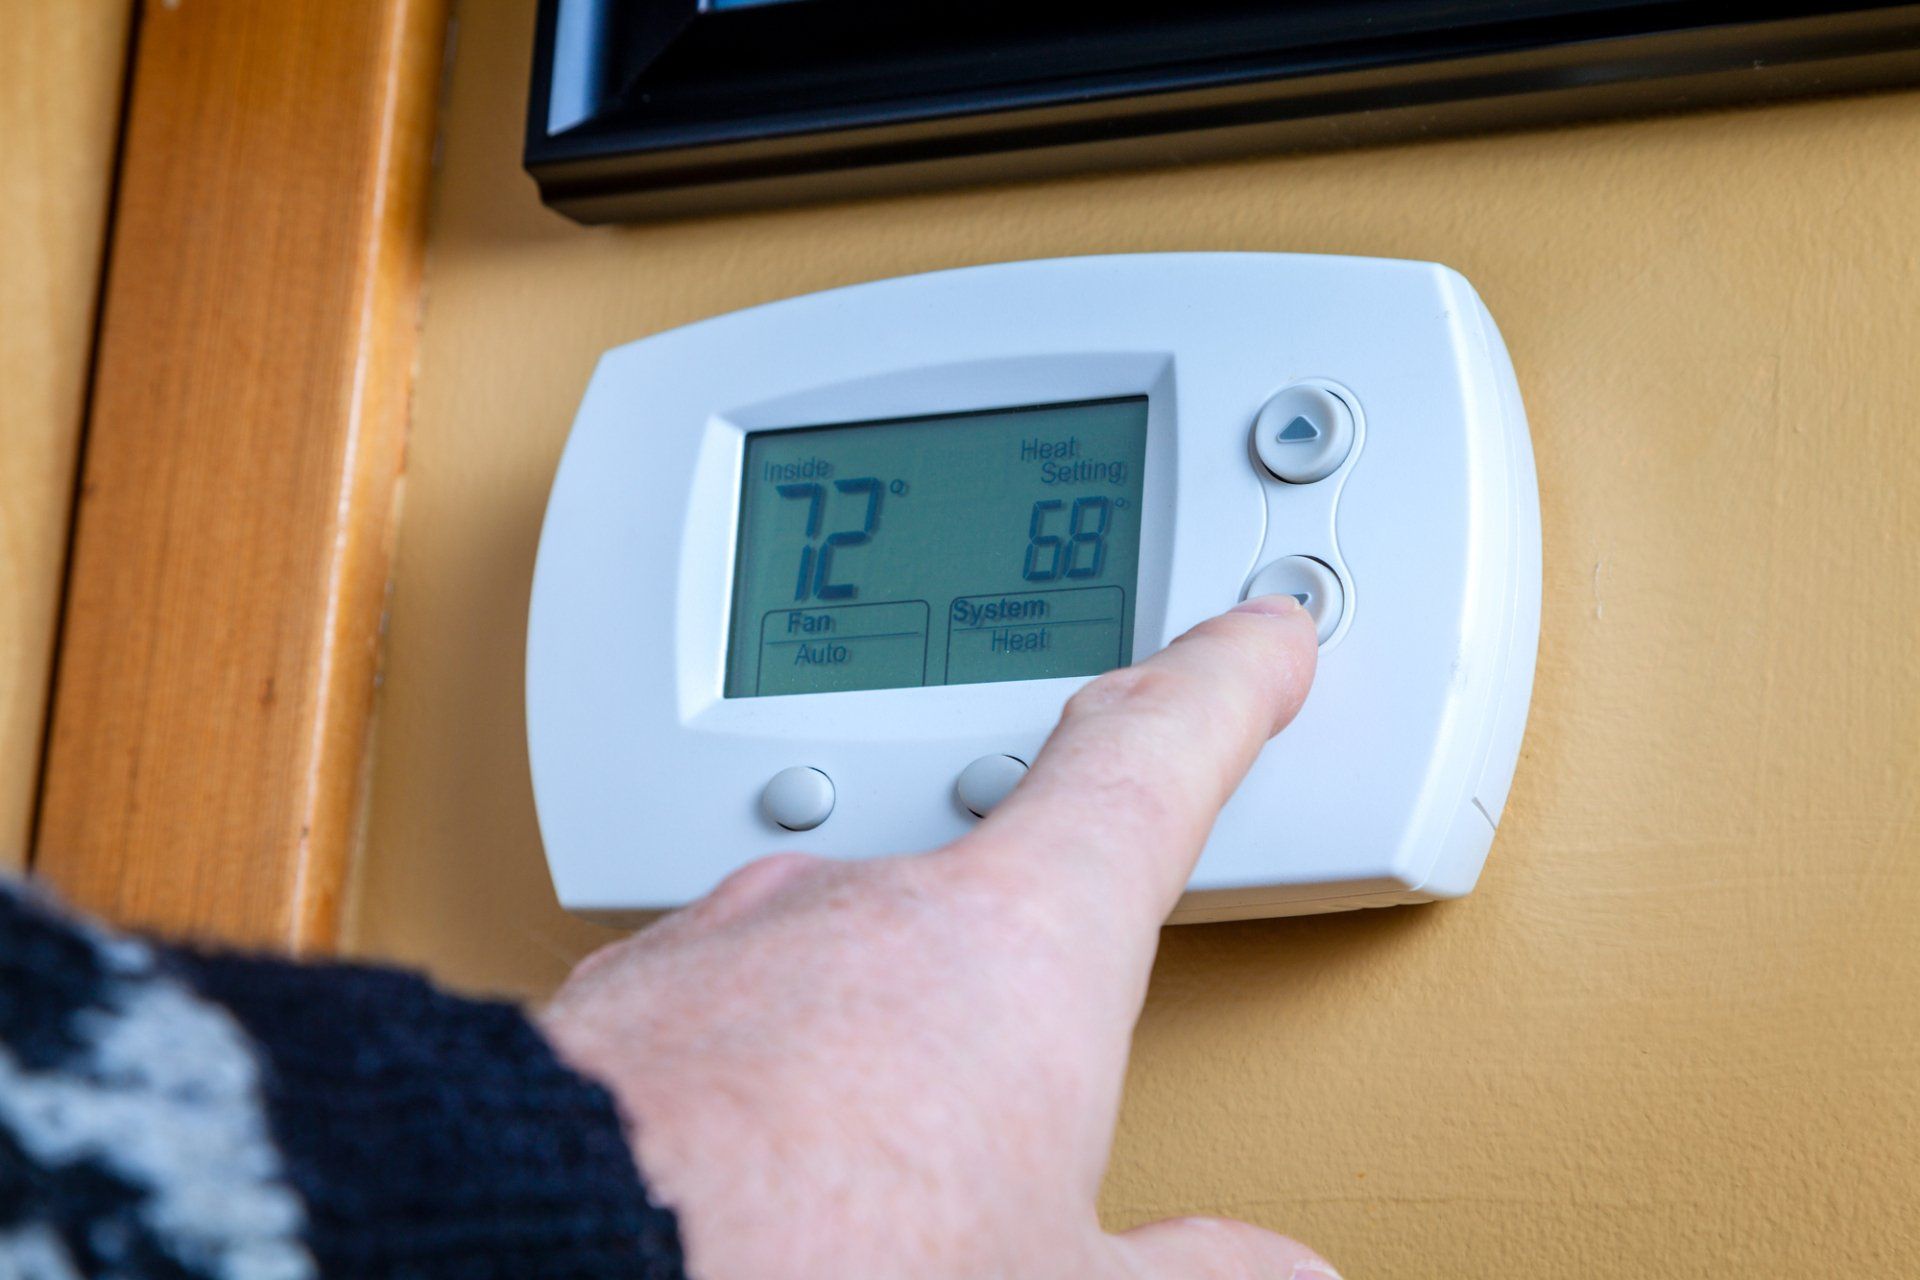 How To Fix Honeywell Thermostat Honeywell Thermostat Troubleshooting Tips